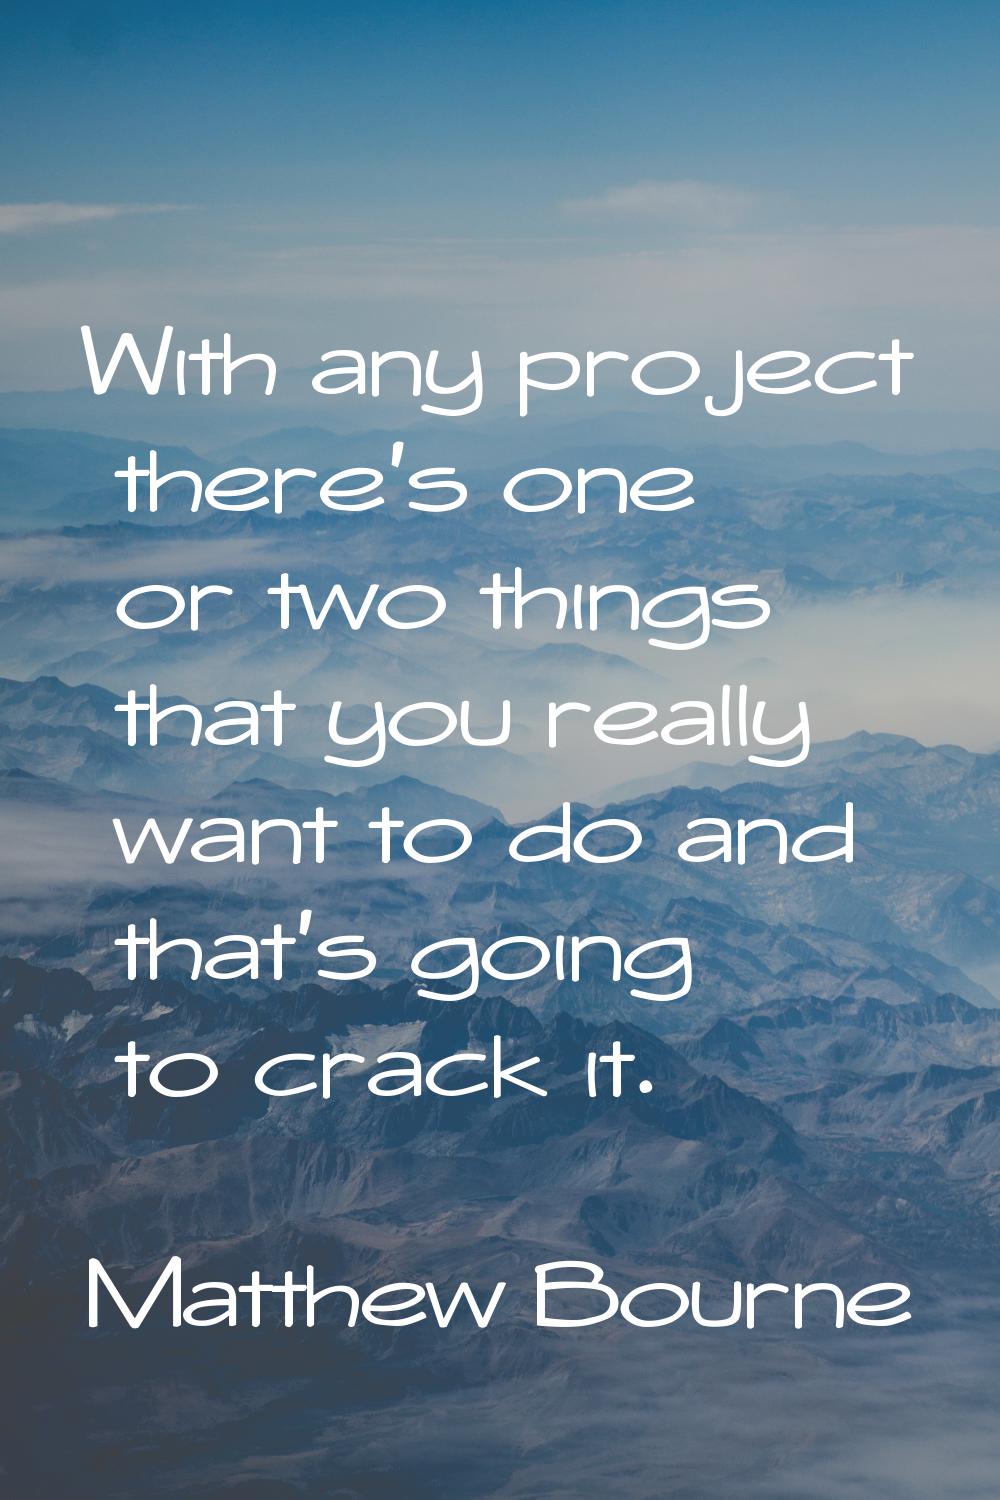 With any project there's one or two things that you really want to do and that's going to crack it.